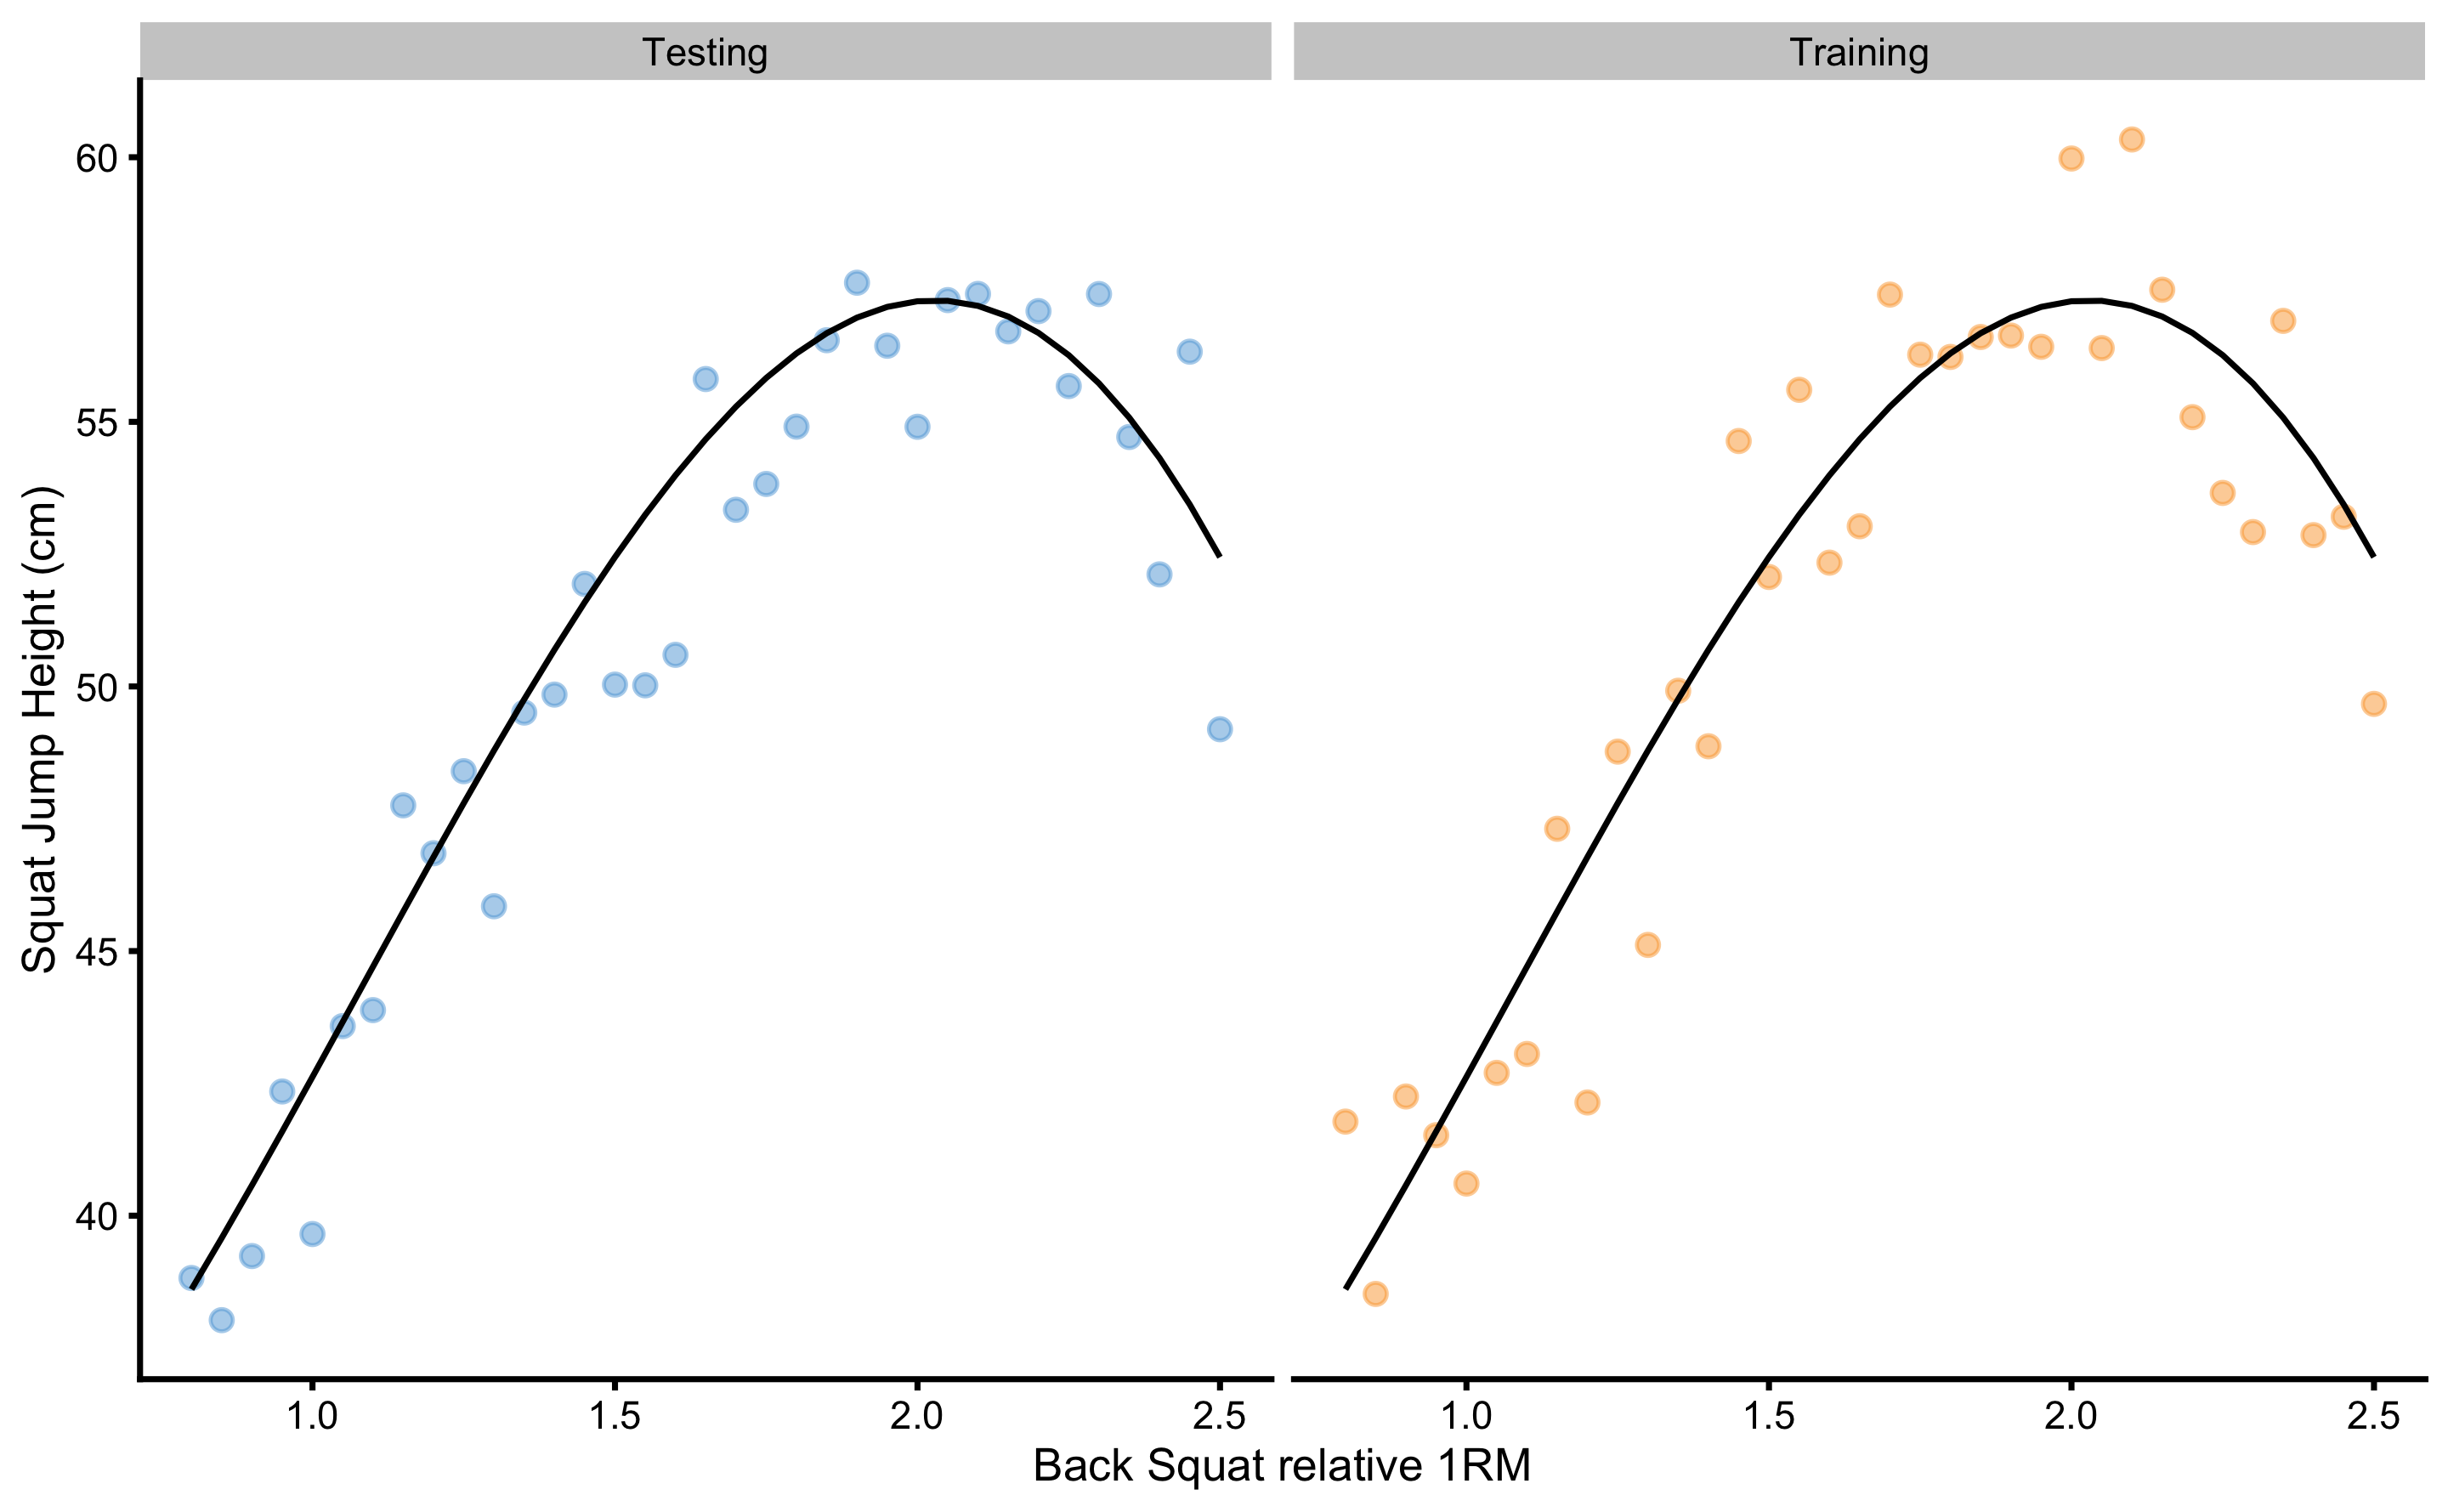 Two samples simulated from the known DGP. Black line represents systematic component of the DGP and it is equal for both training and testing samples. Observations vary in the two samples due stochastic component in the DGP